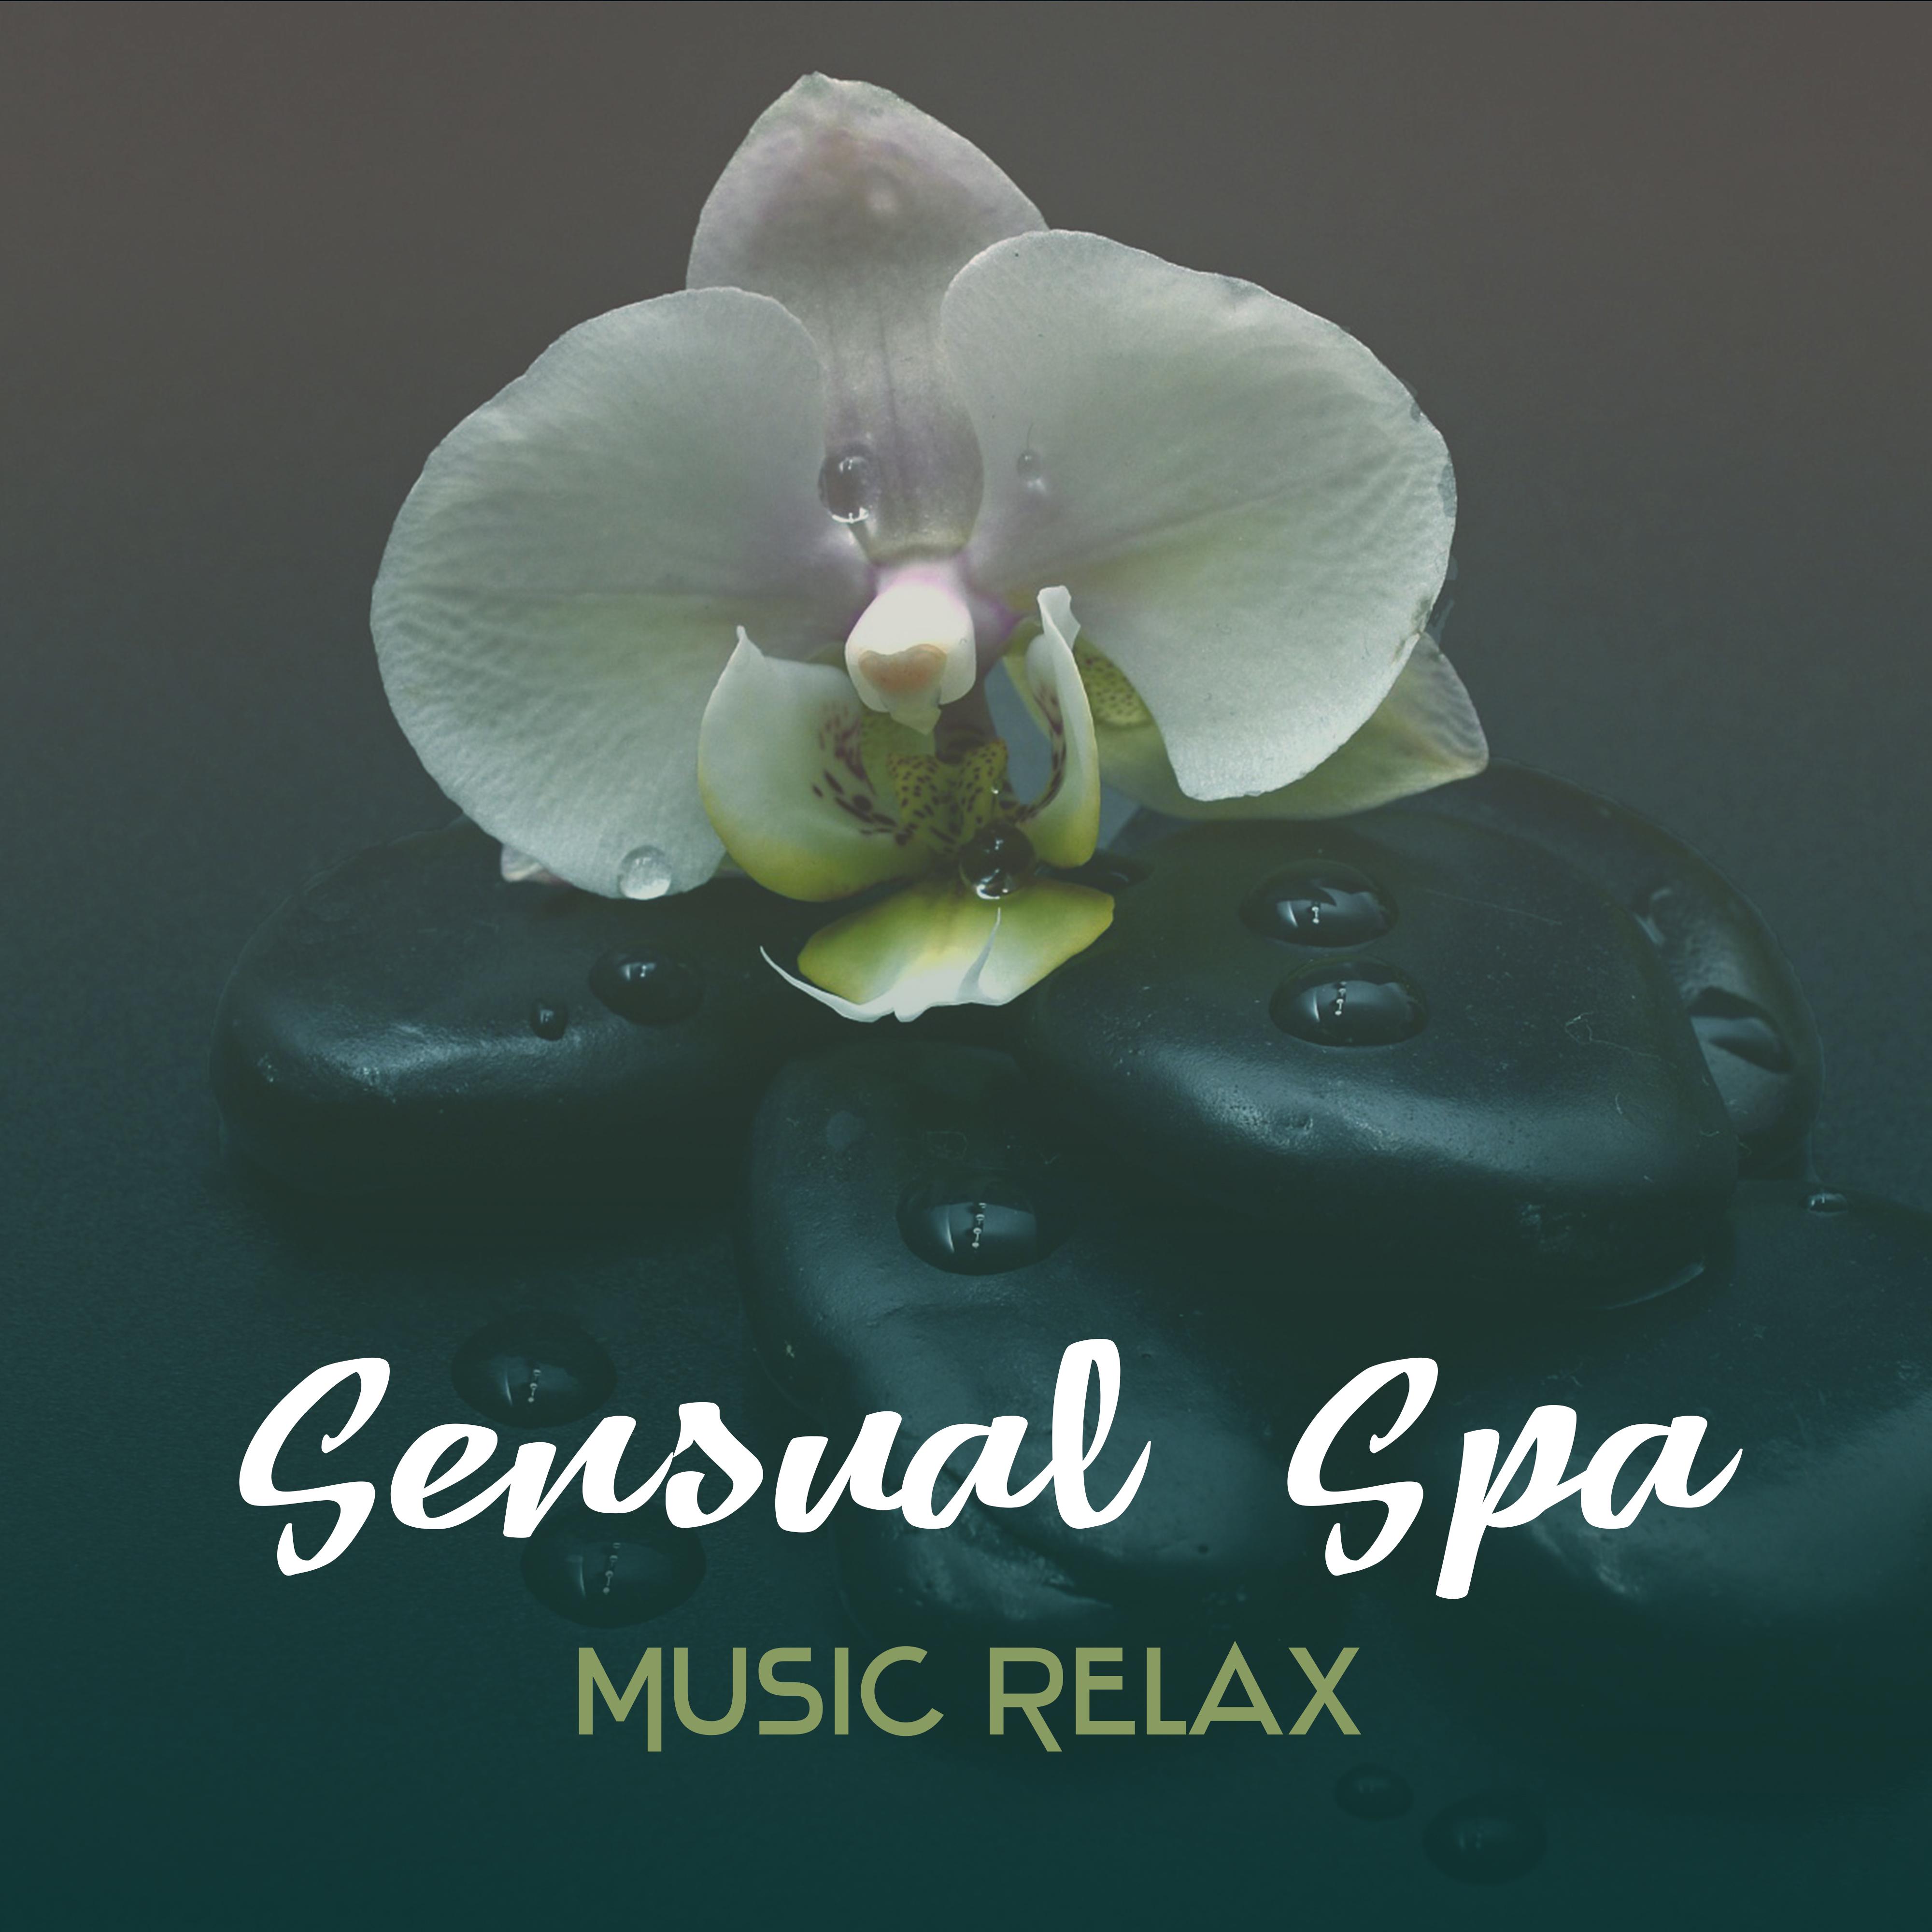 Sensual Spa Music Relax  Awesome Spa Music, Deep Relaxing Natural Sounds, Music for Massage